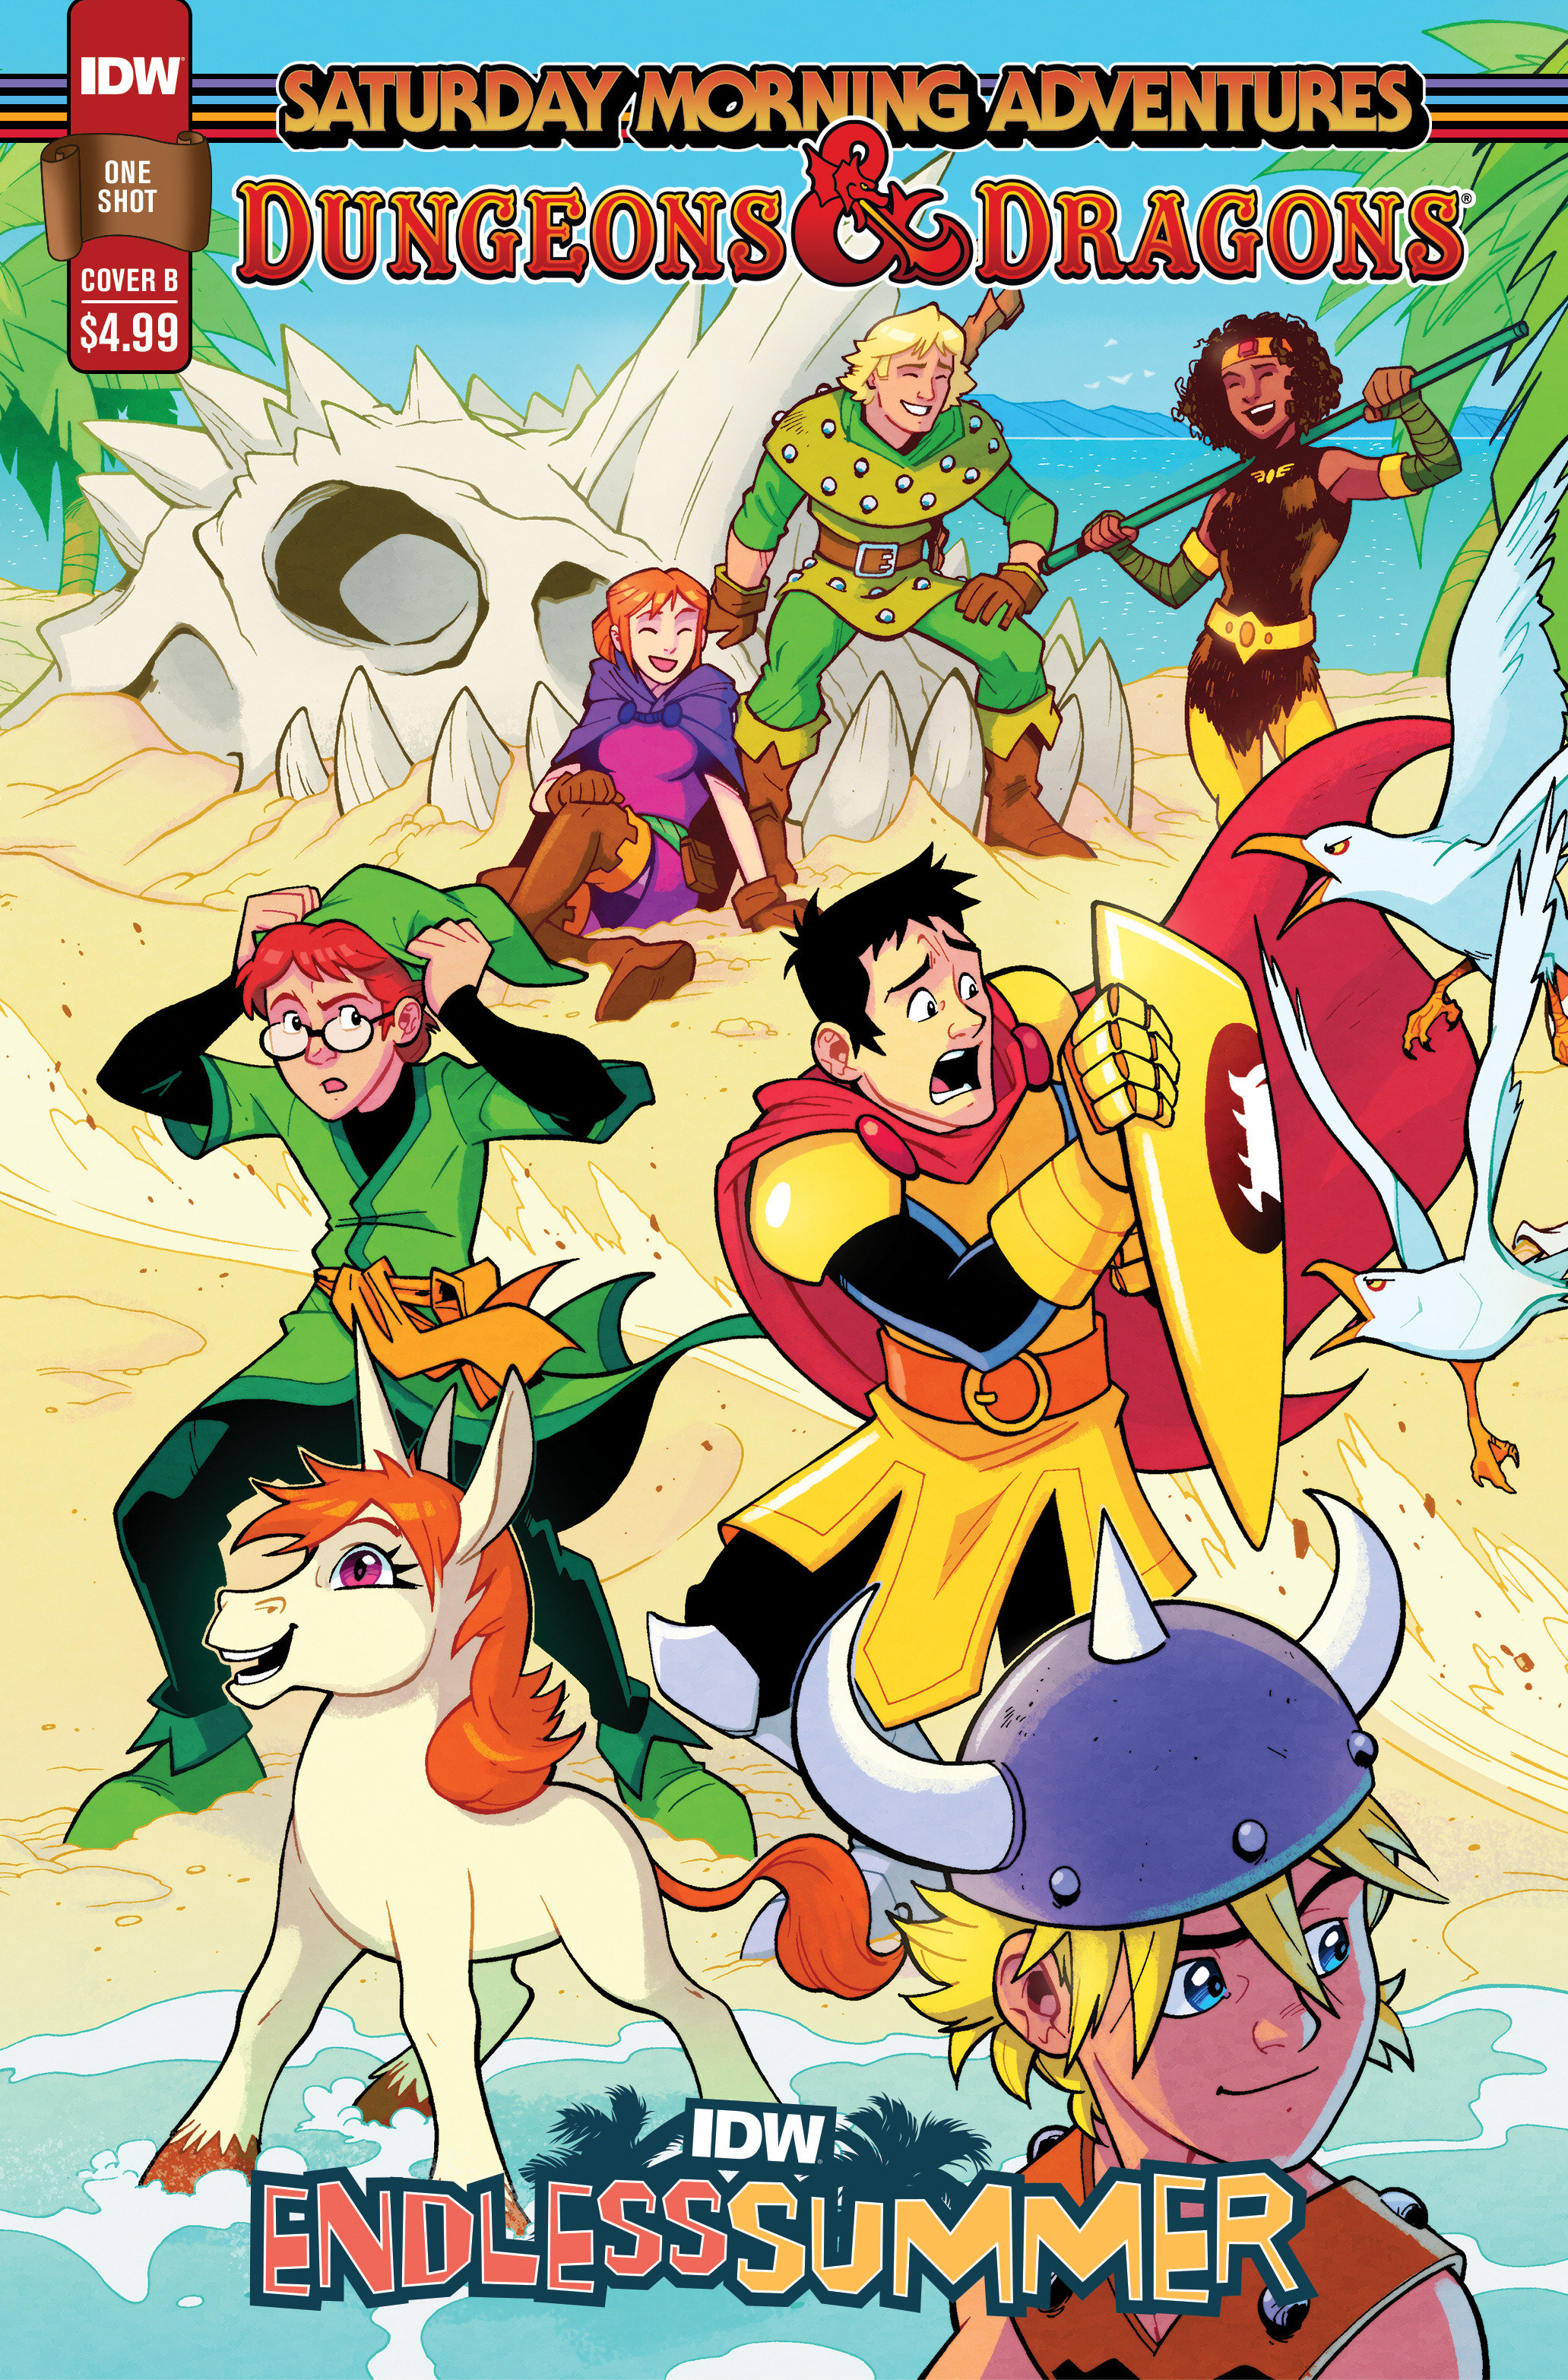 IDW Endless Summer—Dungeons & Dragons Saturday Morning Adventures Cover B Lawrence